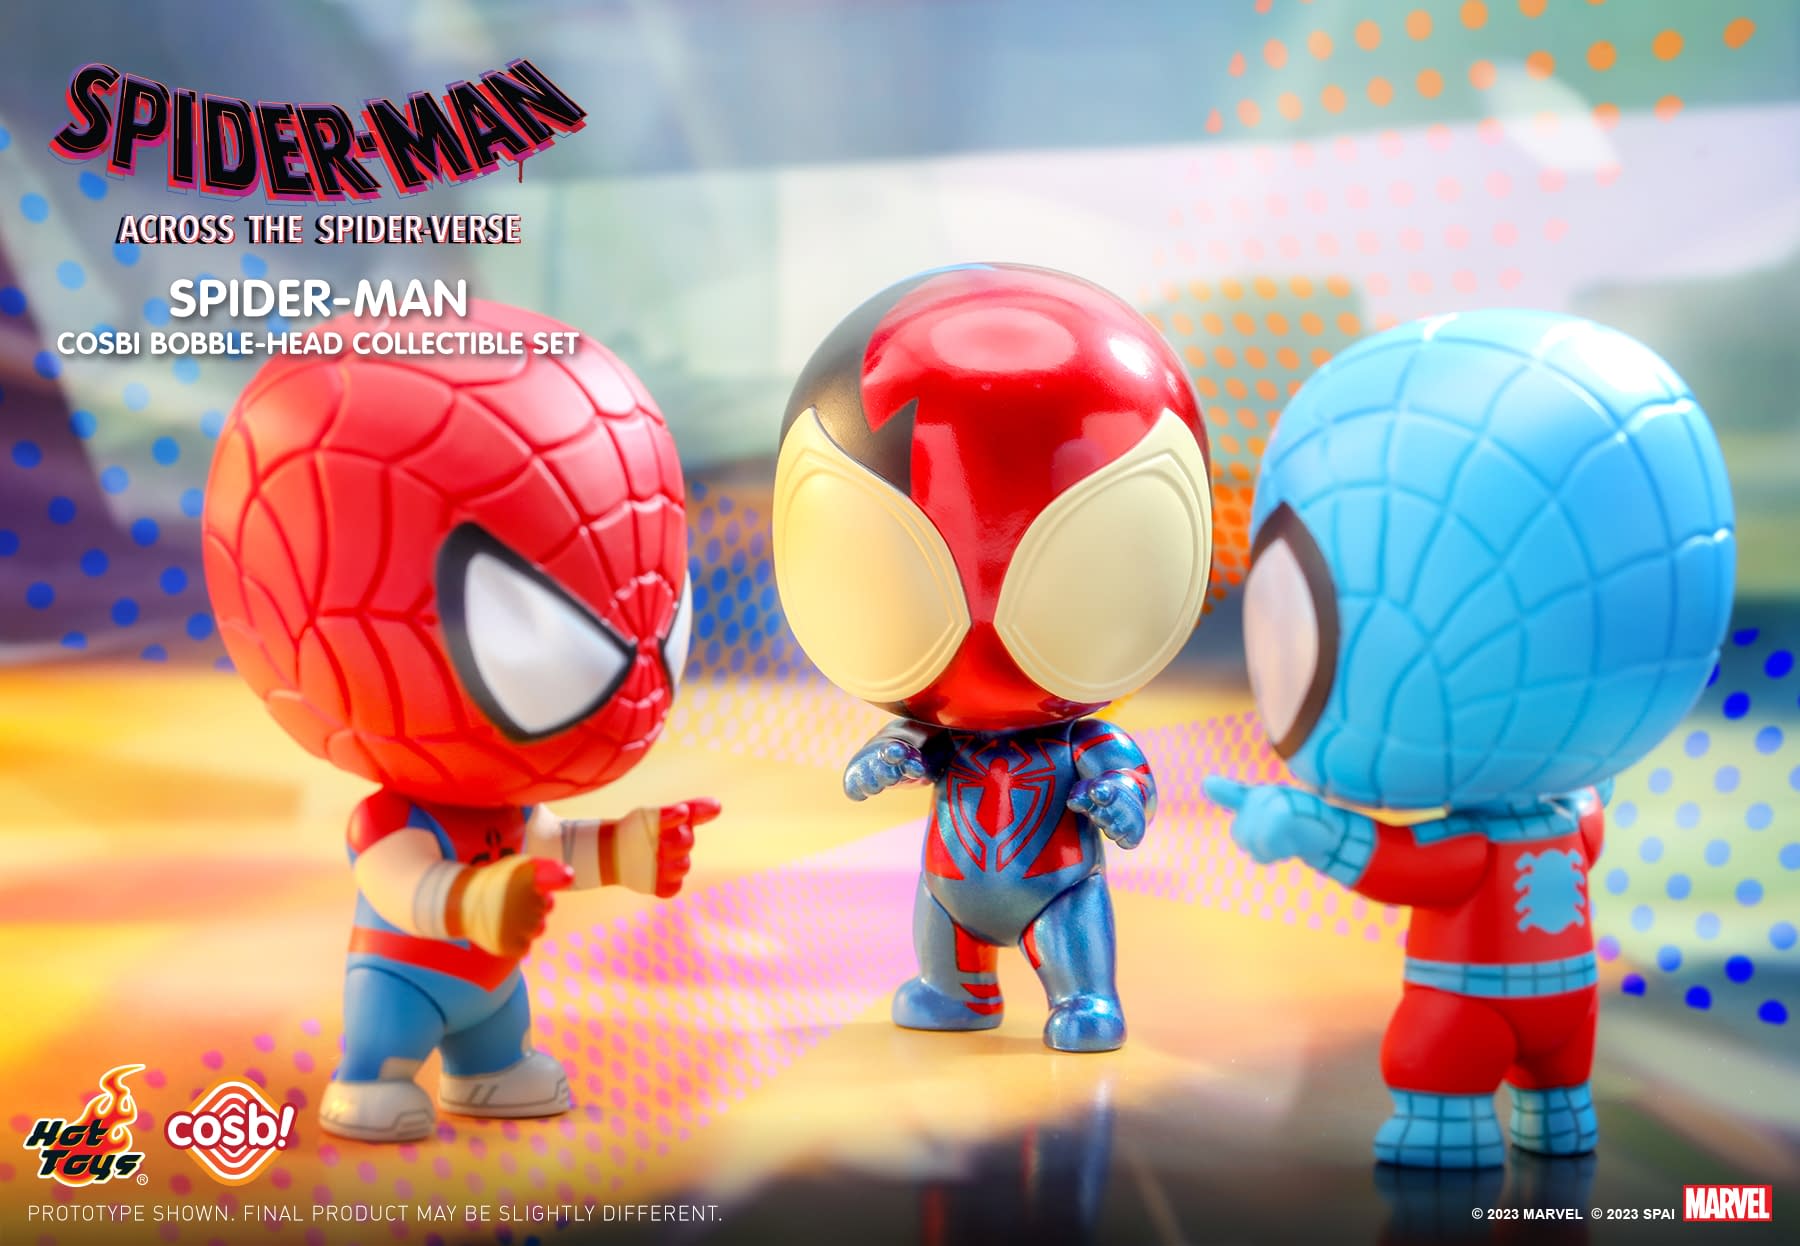 Enter the Spider Society with Hot Toys Newest Spider-Man Cosbi Set10